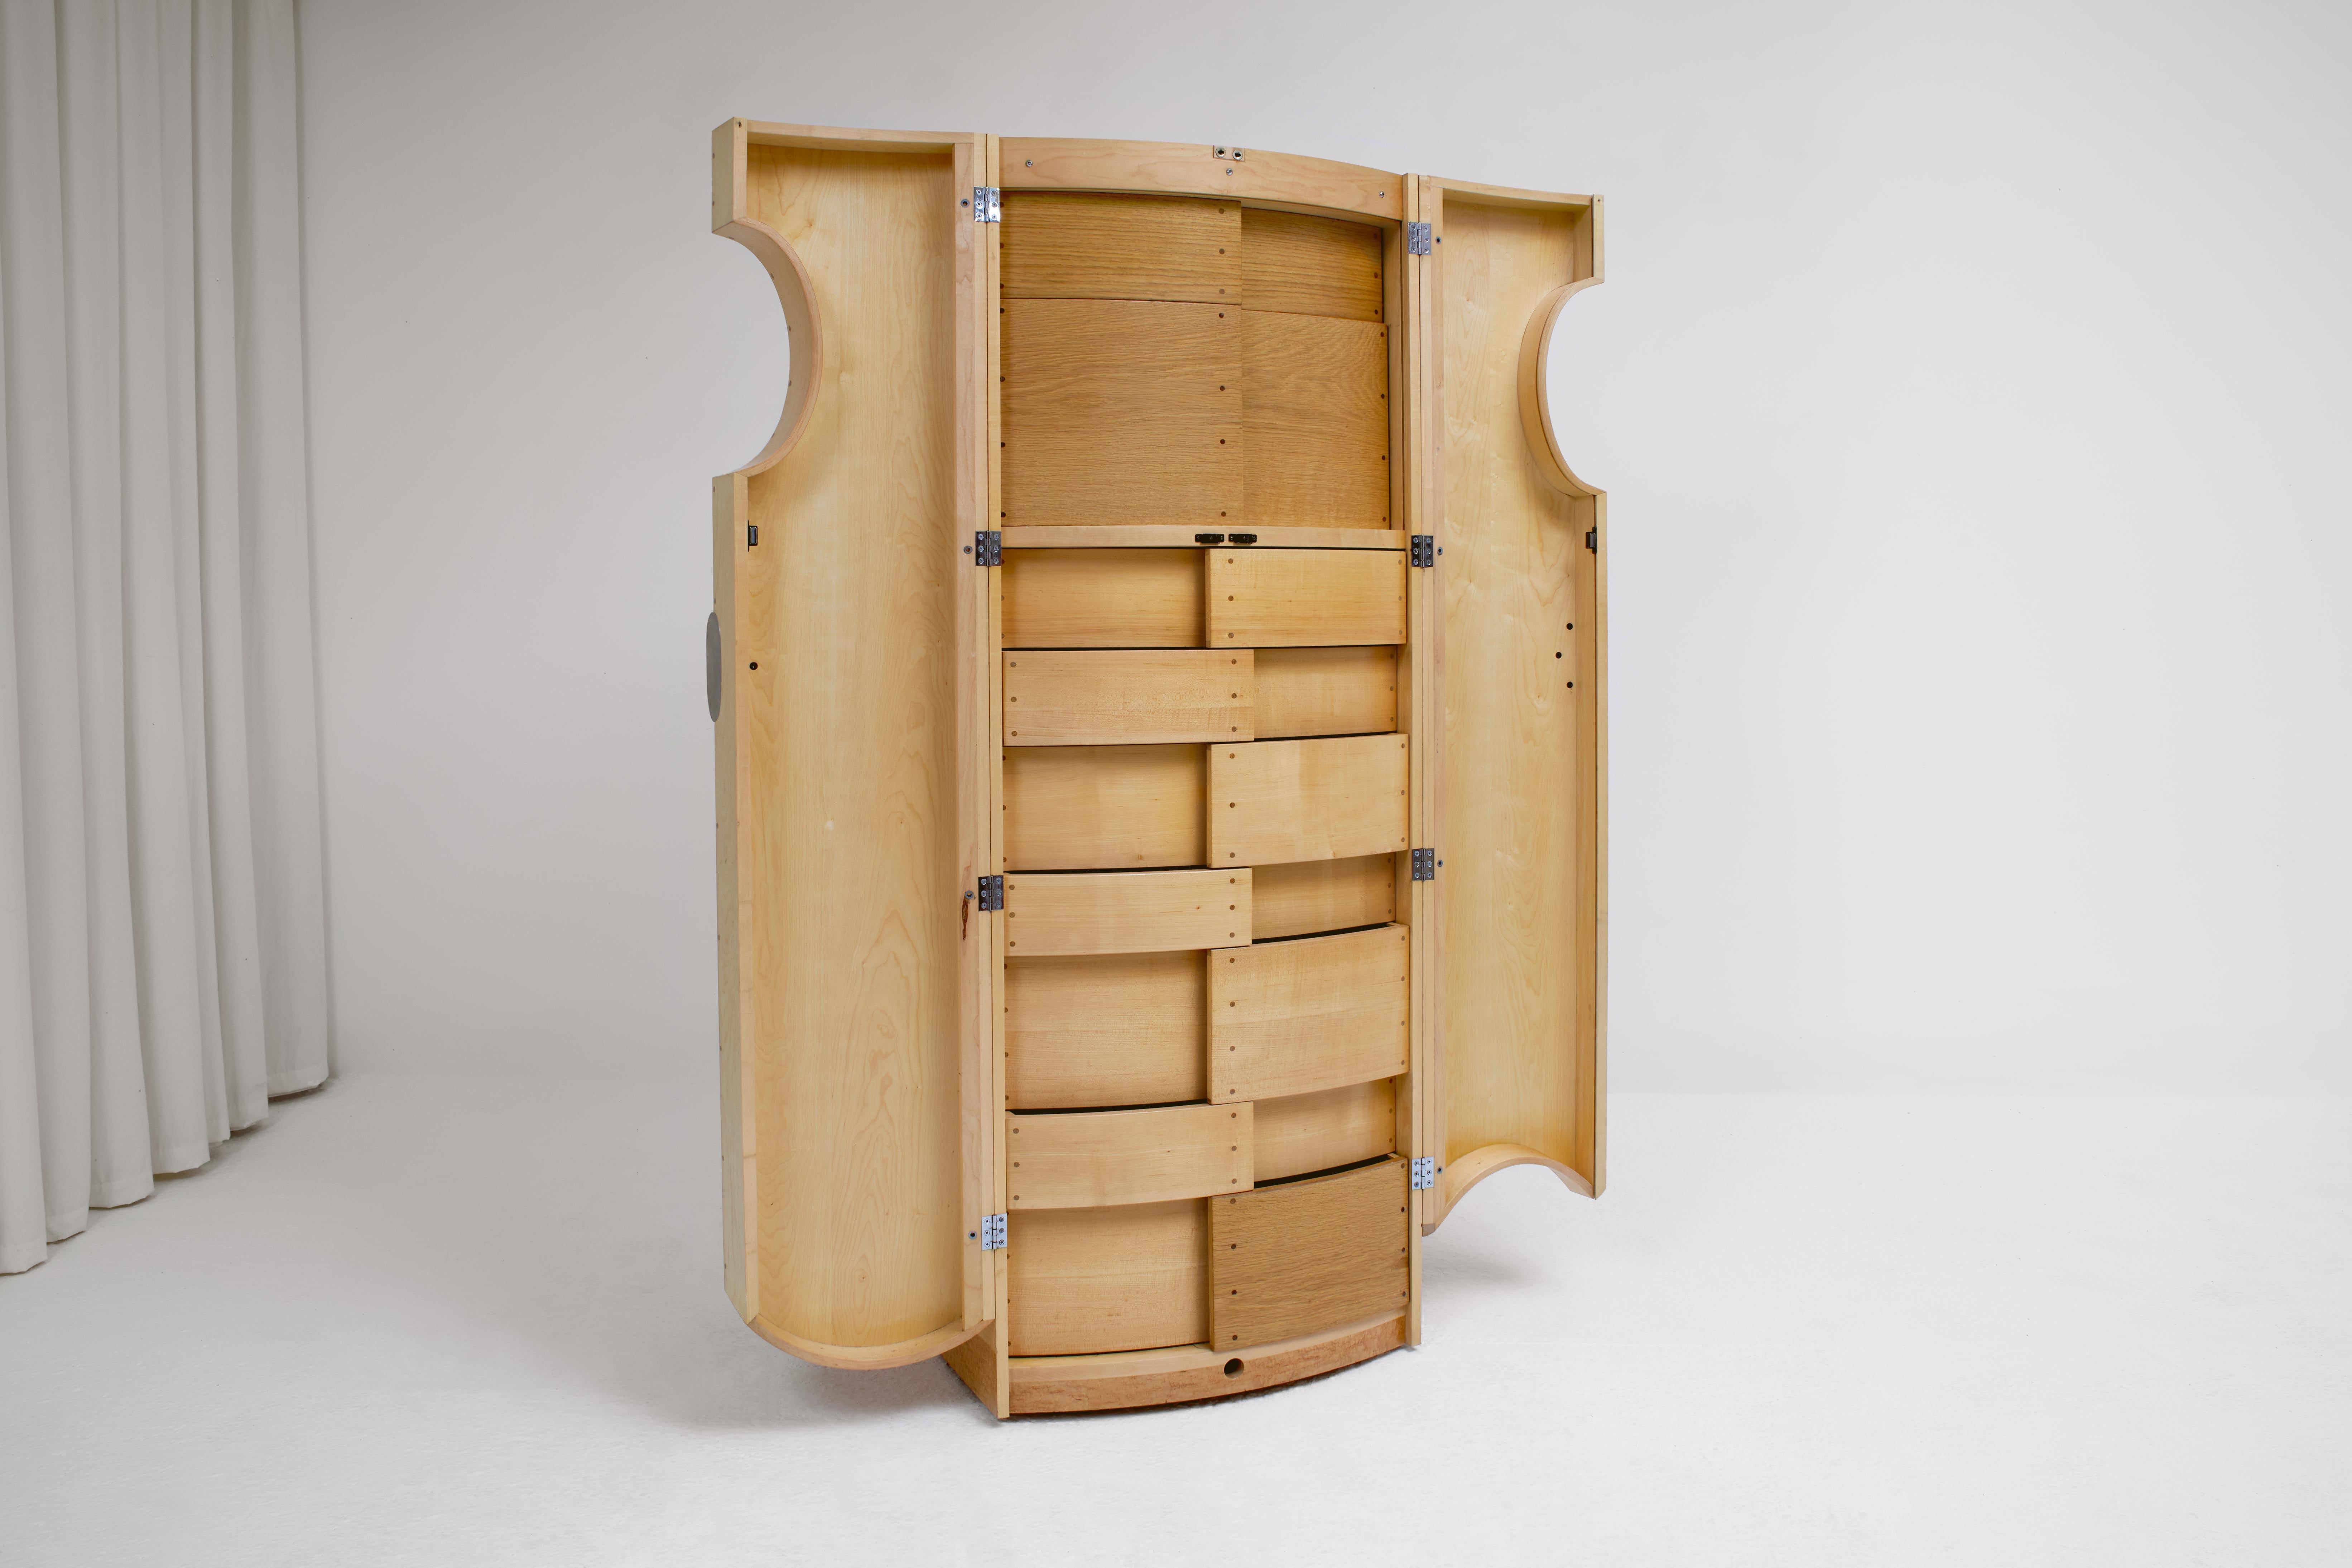 This cabinet was designed and produced by Scottish based craftsman Angus Ross in 2000. He was commissioned by The Wilson Art Gallery and Museum to build a museum quality cabinet to display their costume and textile collection. The cabinet has since